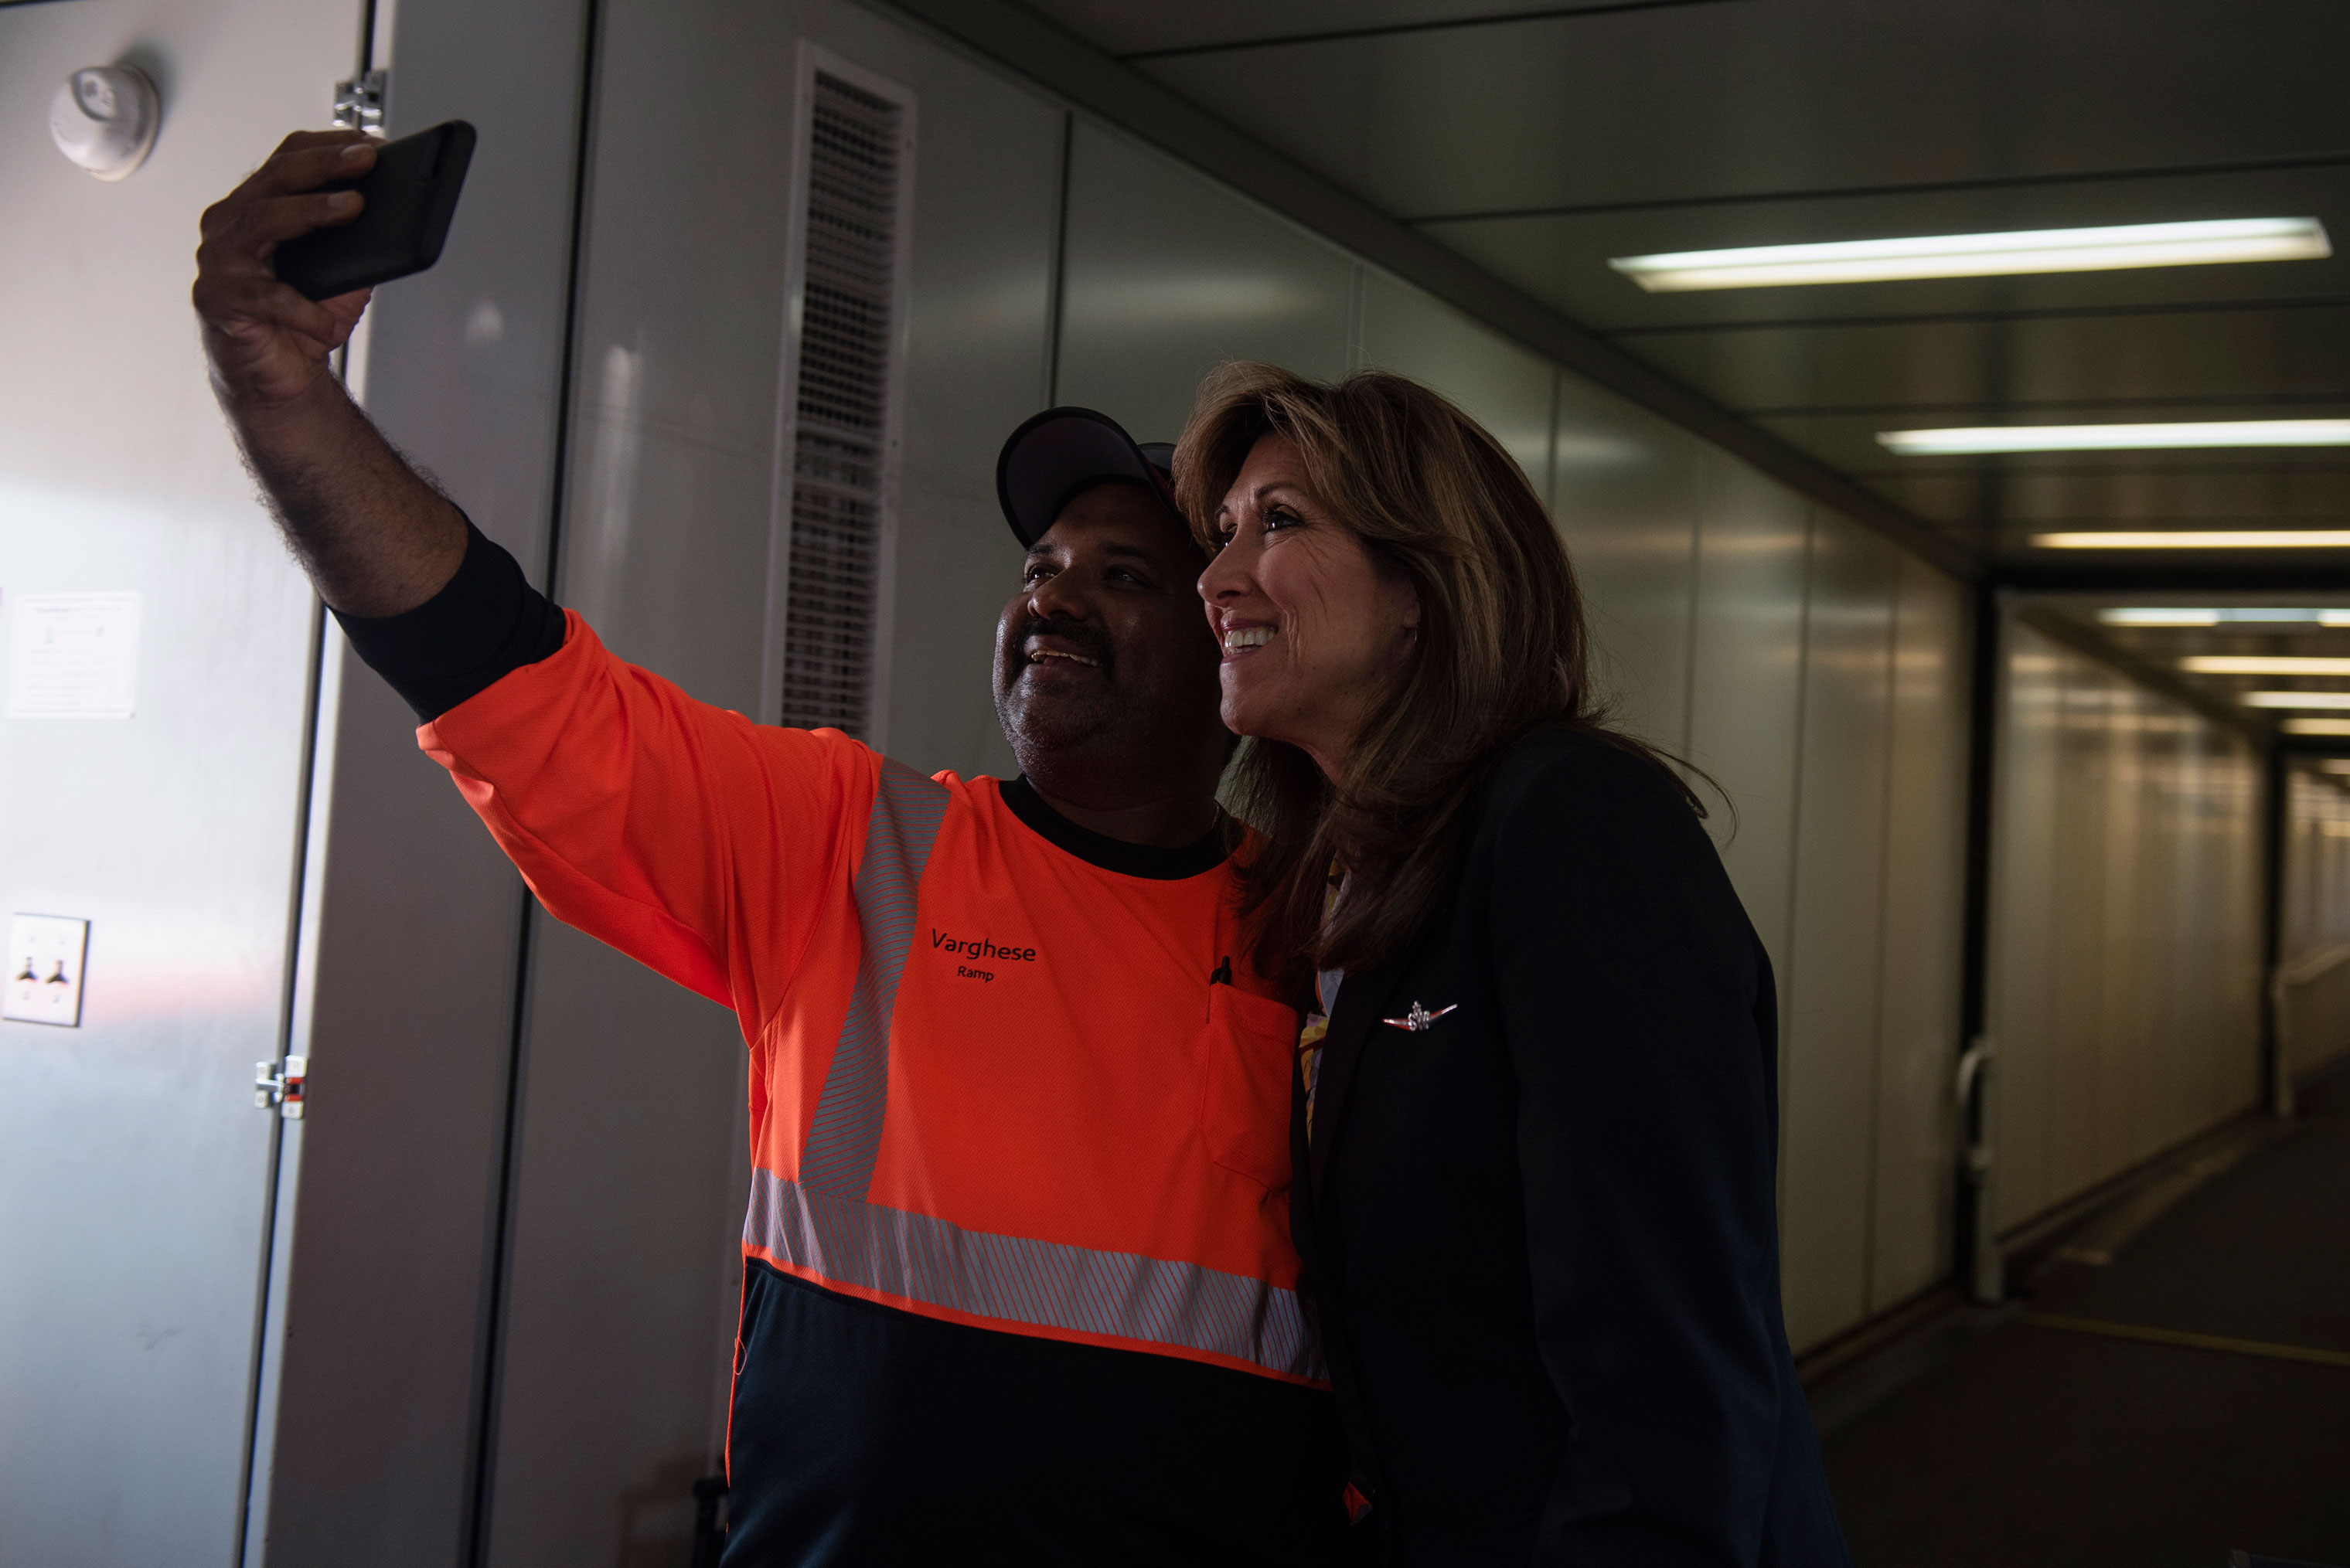 Pilot Tammie Jo Shults poses for a selfie on Aug. 1, 2018 at the San Antonio International Airport. (Callaghan O'Hare for TIME)